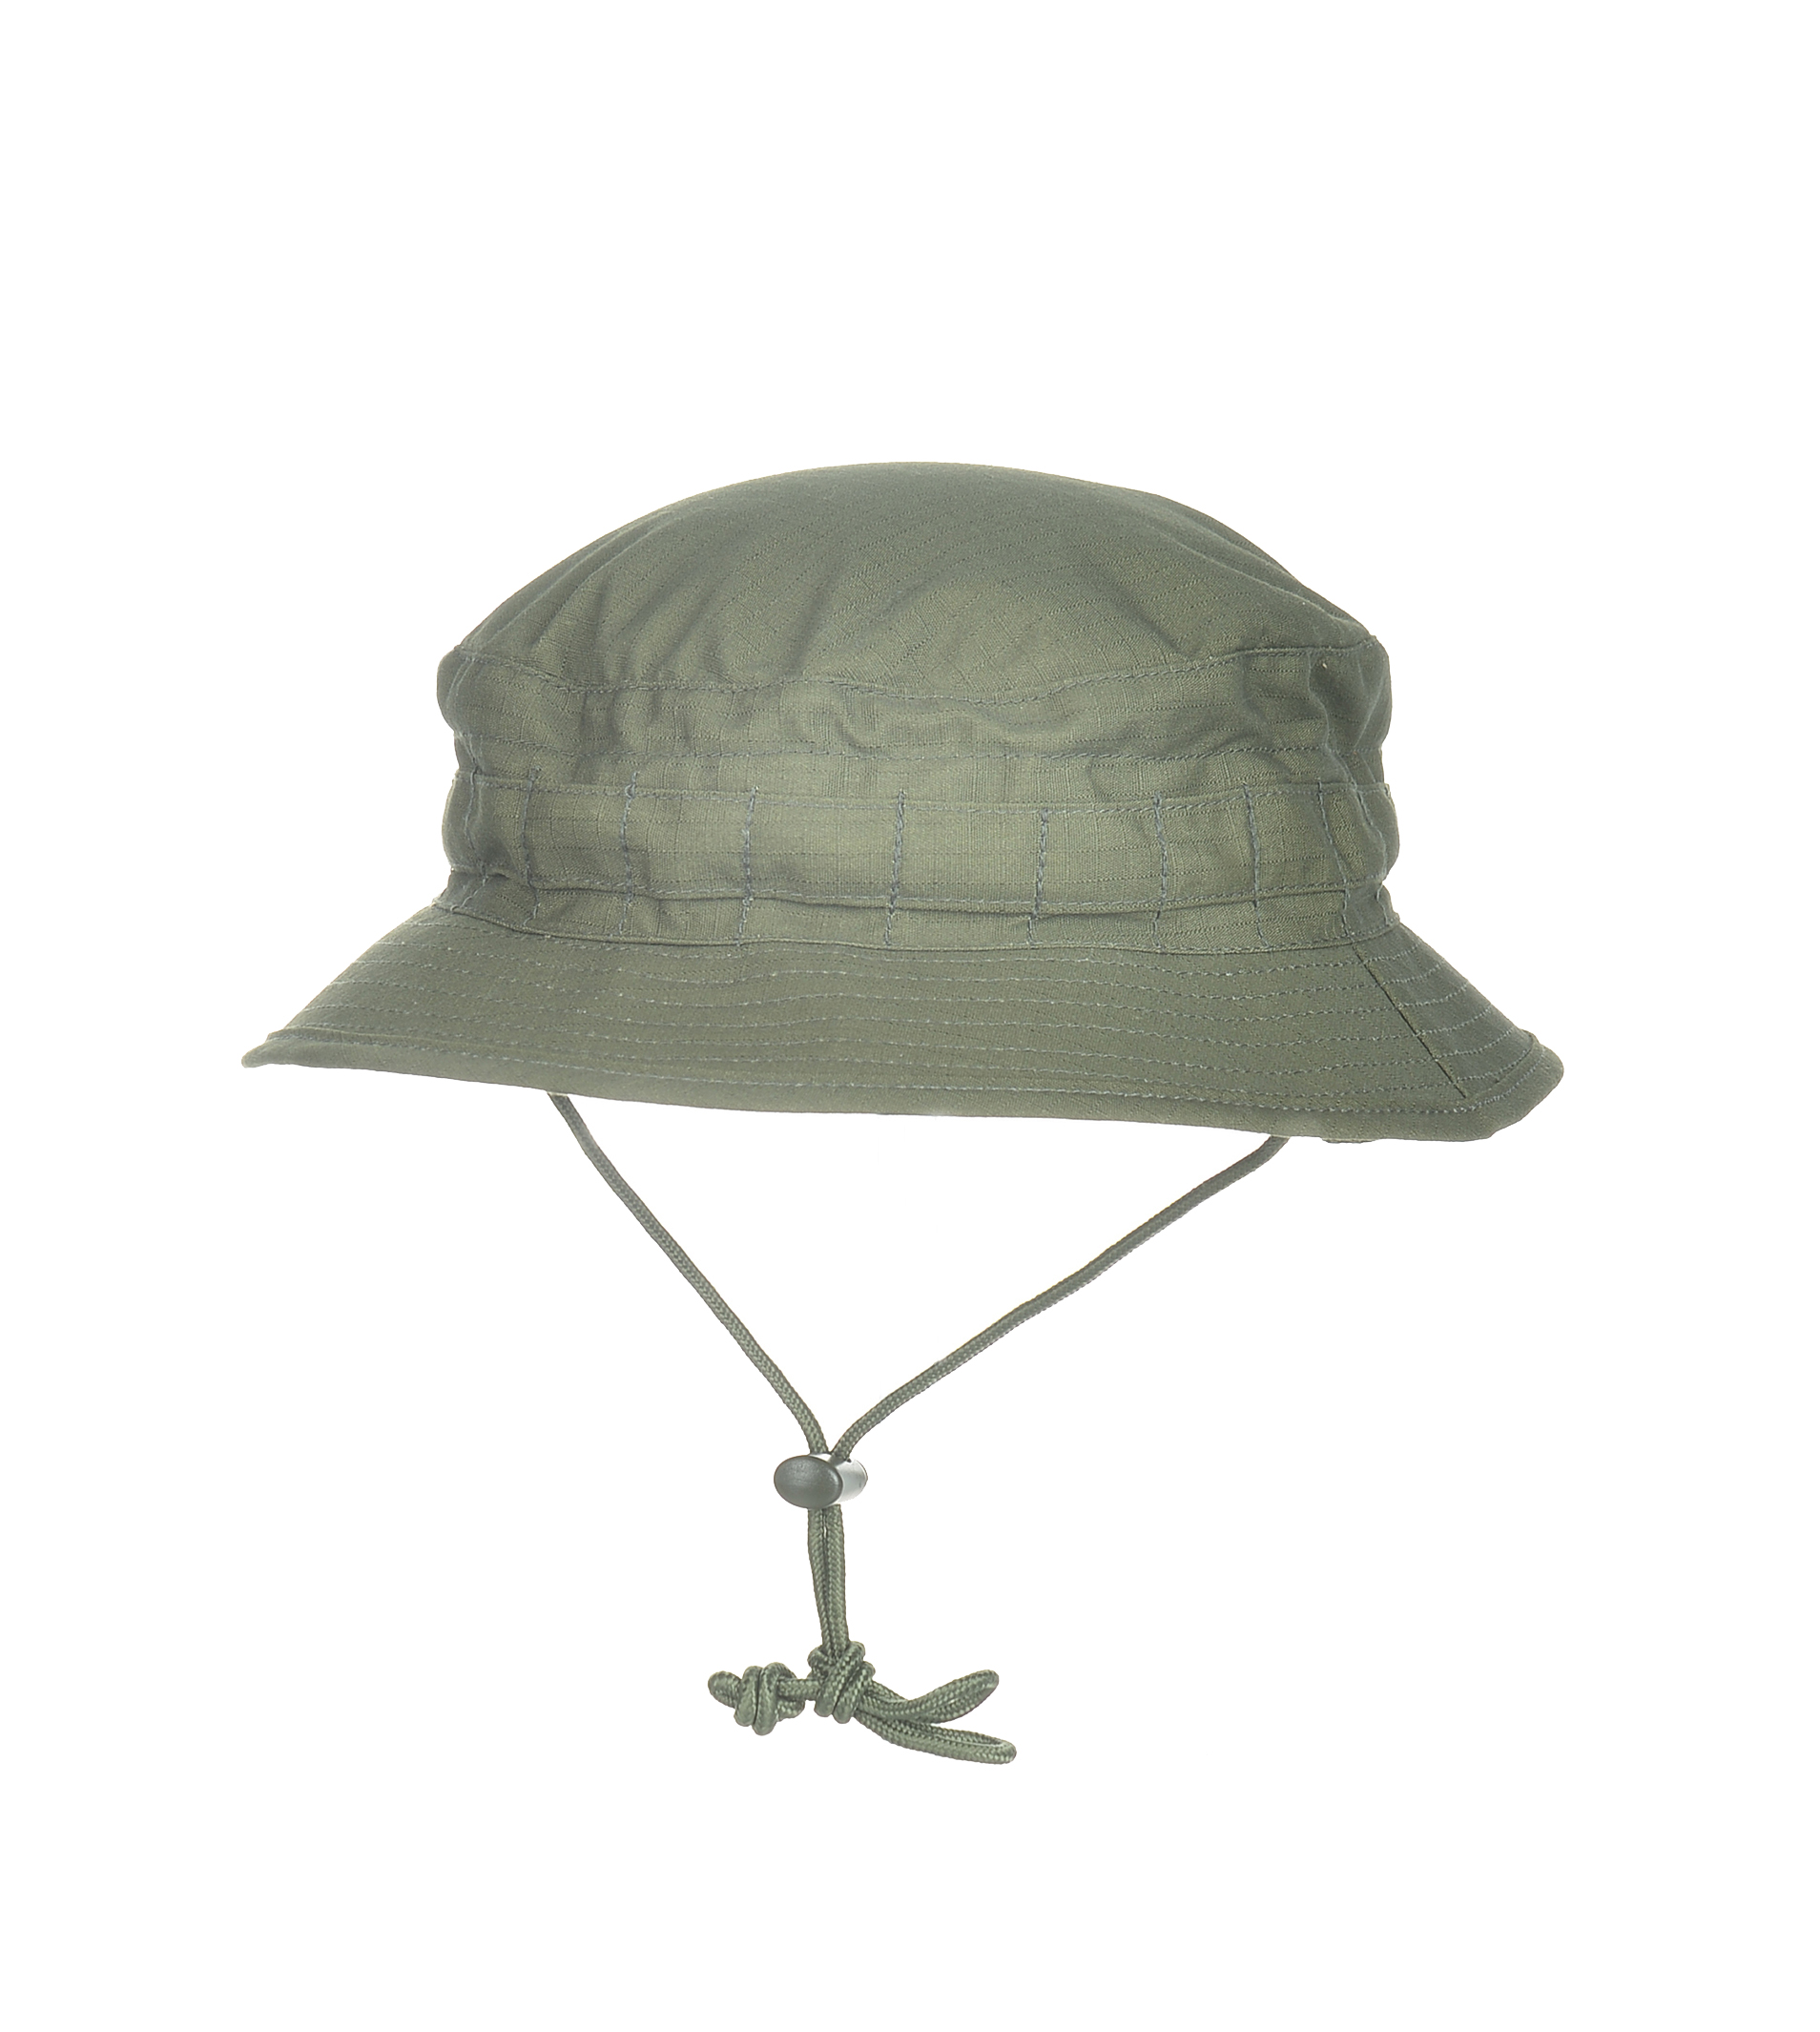 SPECIAL GI BOONIE HAT